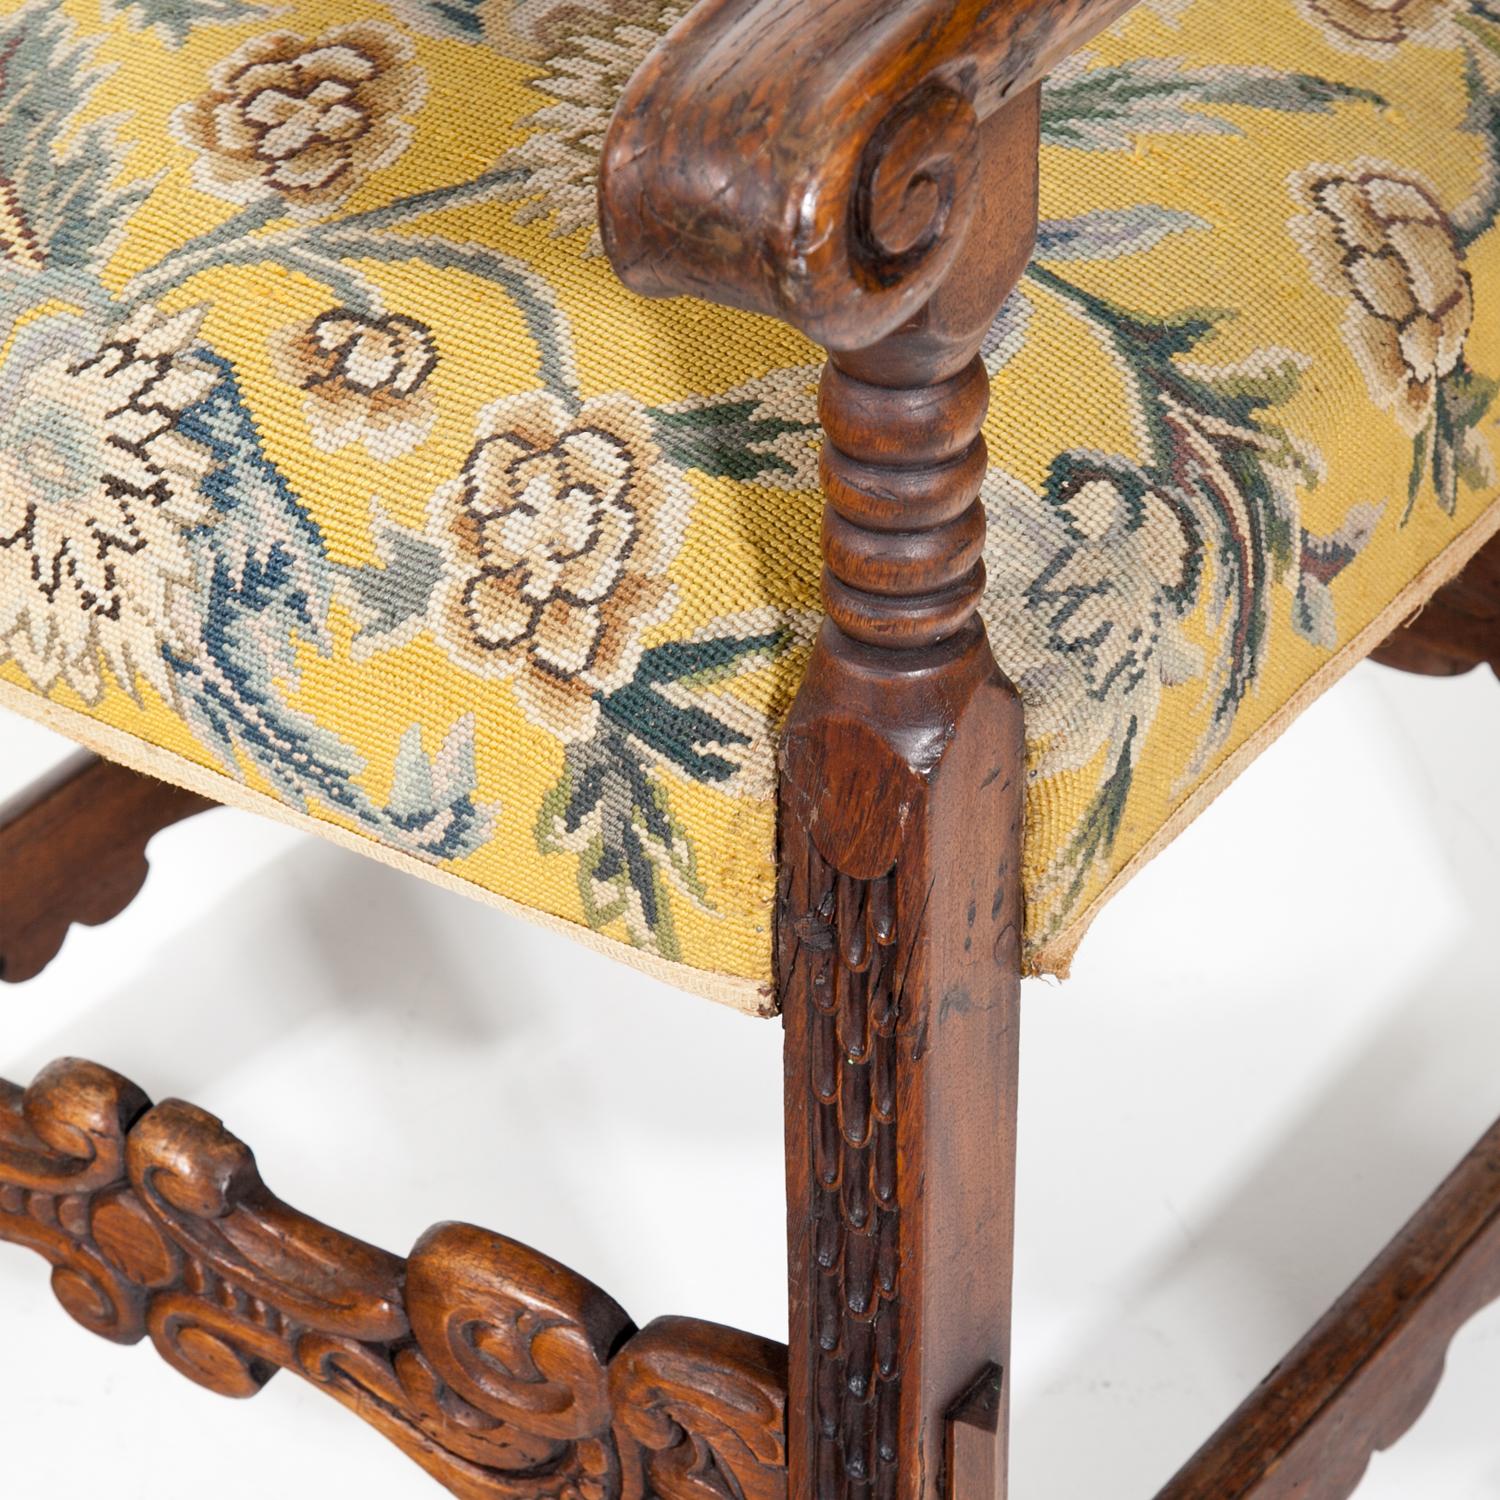 Renaissance style armchair standing on a walnut base with scales- and leaf-décor. The armchairs slightly descend towards the legs and end in volutes. Seat and backrest are covered in a yellow fabric with flower décor.